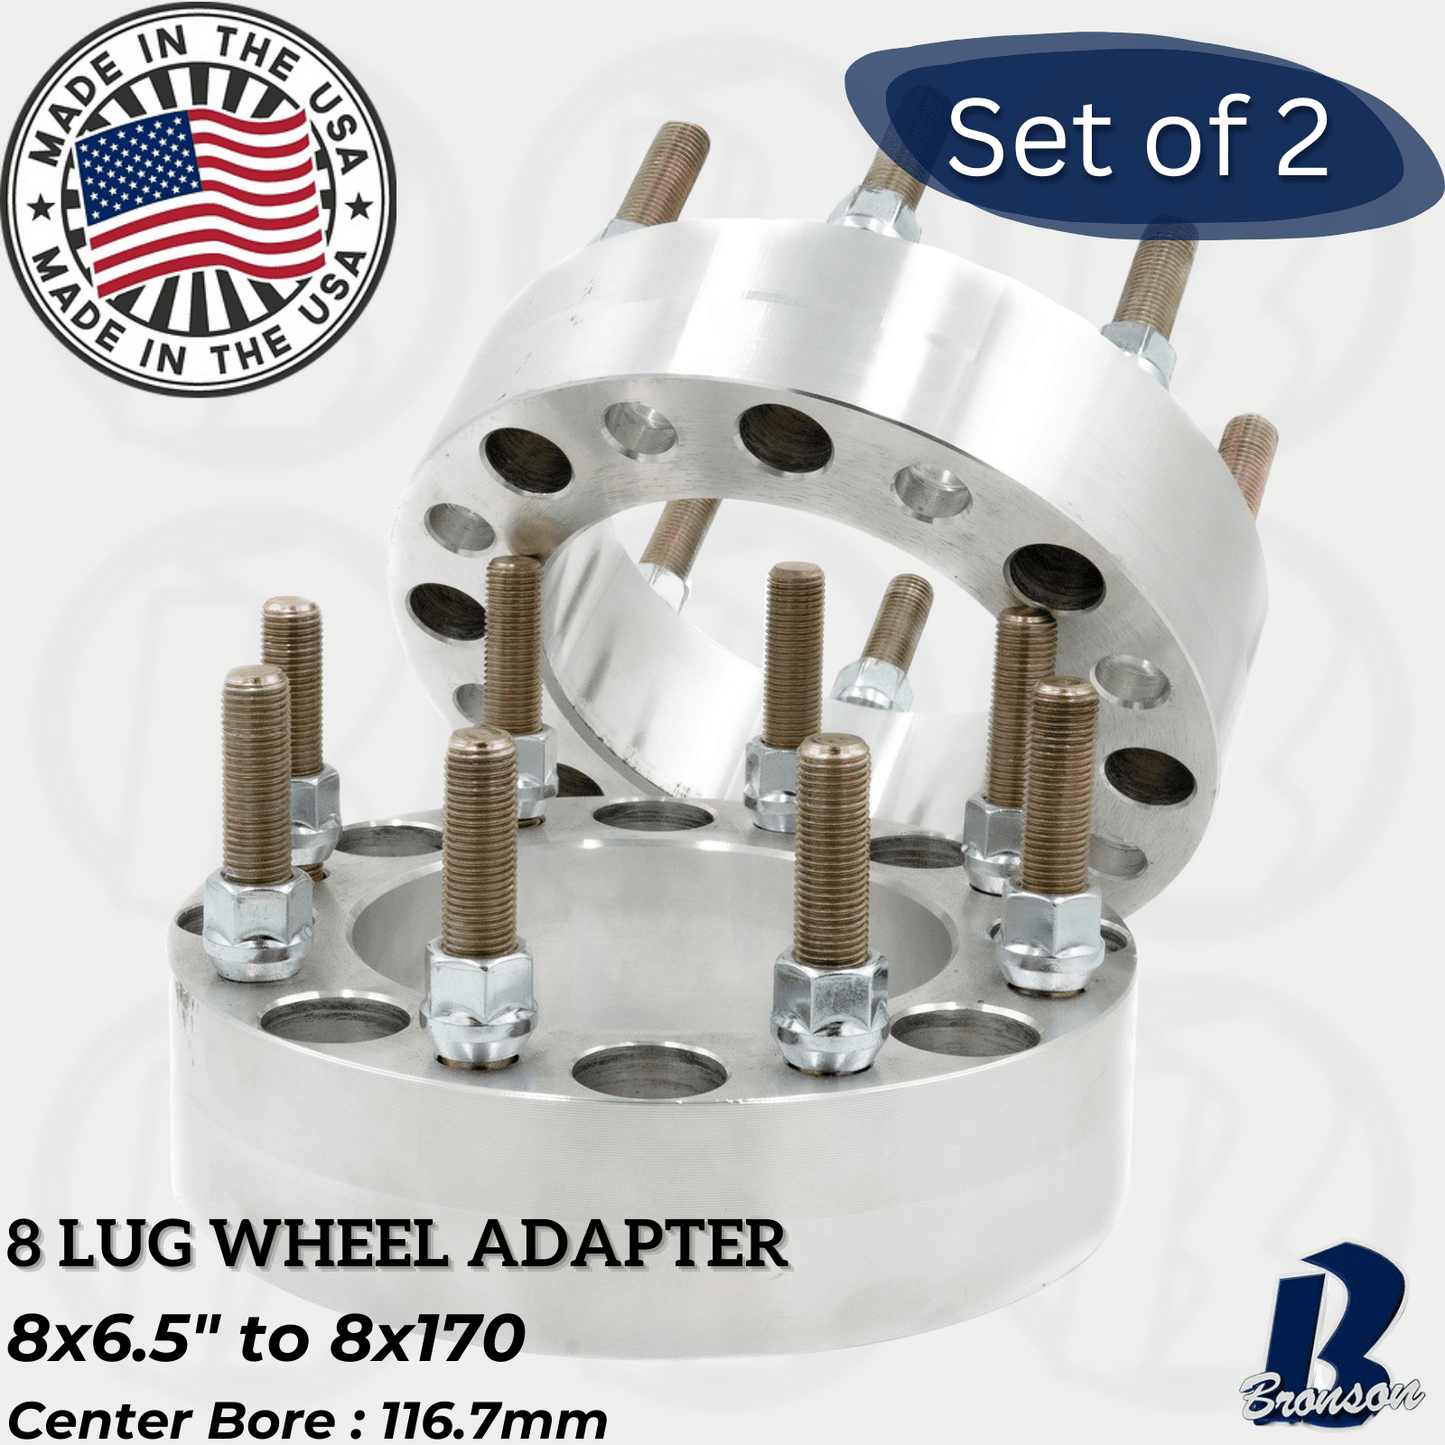 8x6.5" to 8x170 Wheel Spacer/Adapter - Thickness: 1"-4"